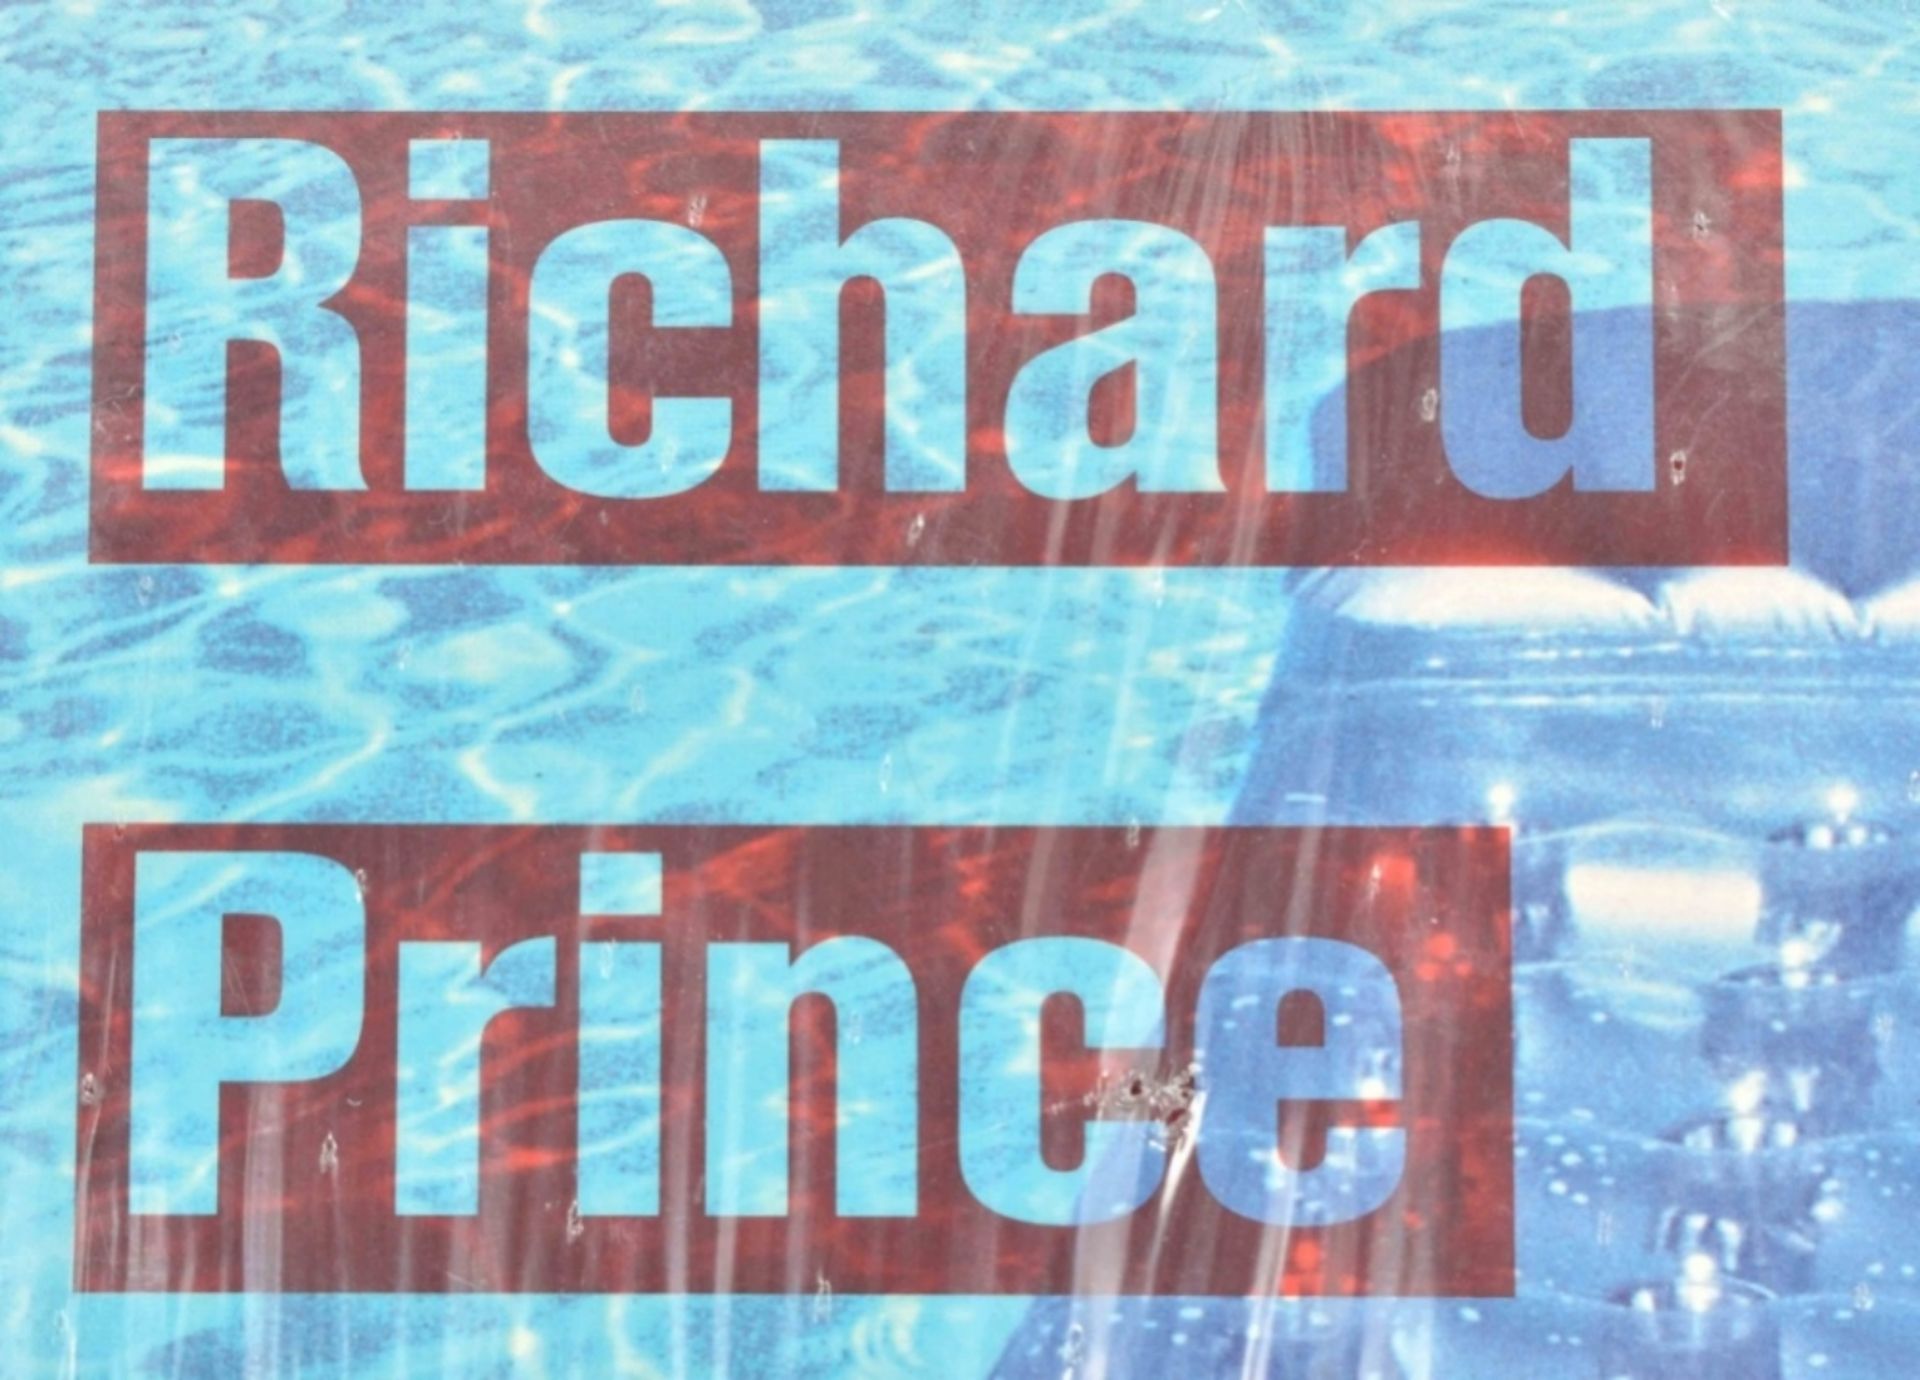 [s and up] Richard Prince. Adult Comedy Action Drama - Image 4 of 4